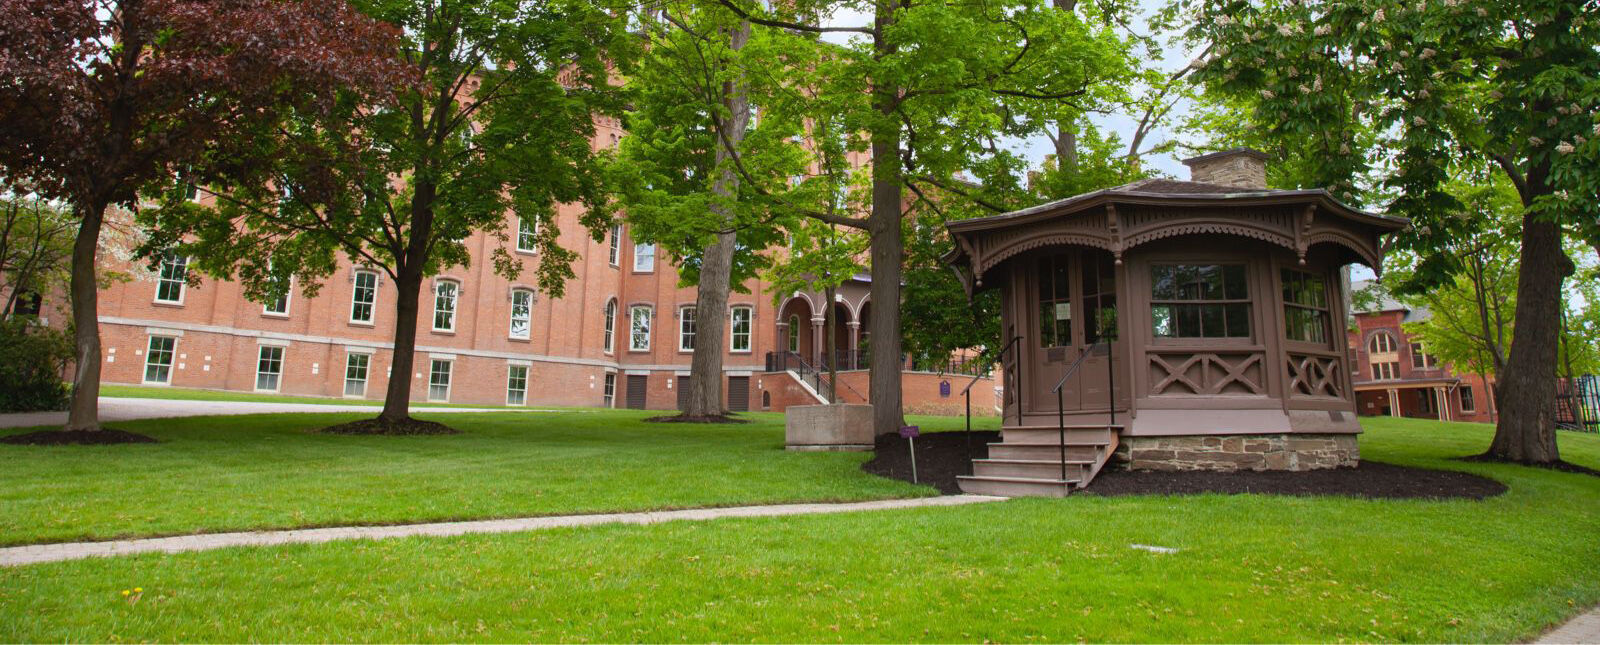 The Mark Twain Study is pictured in front of a line of trees and Cowles Hall